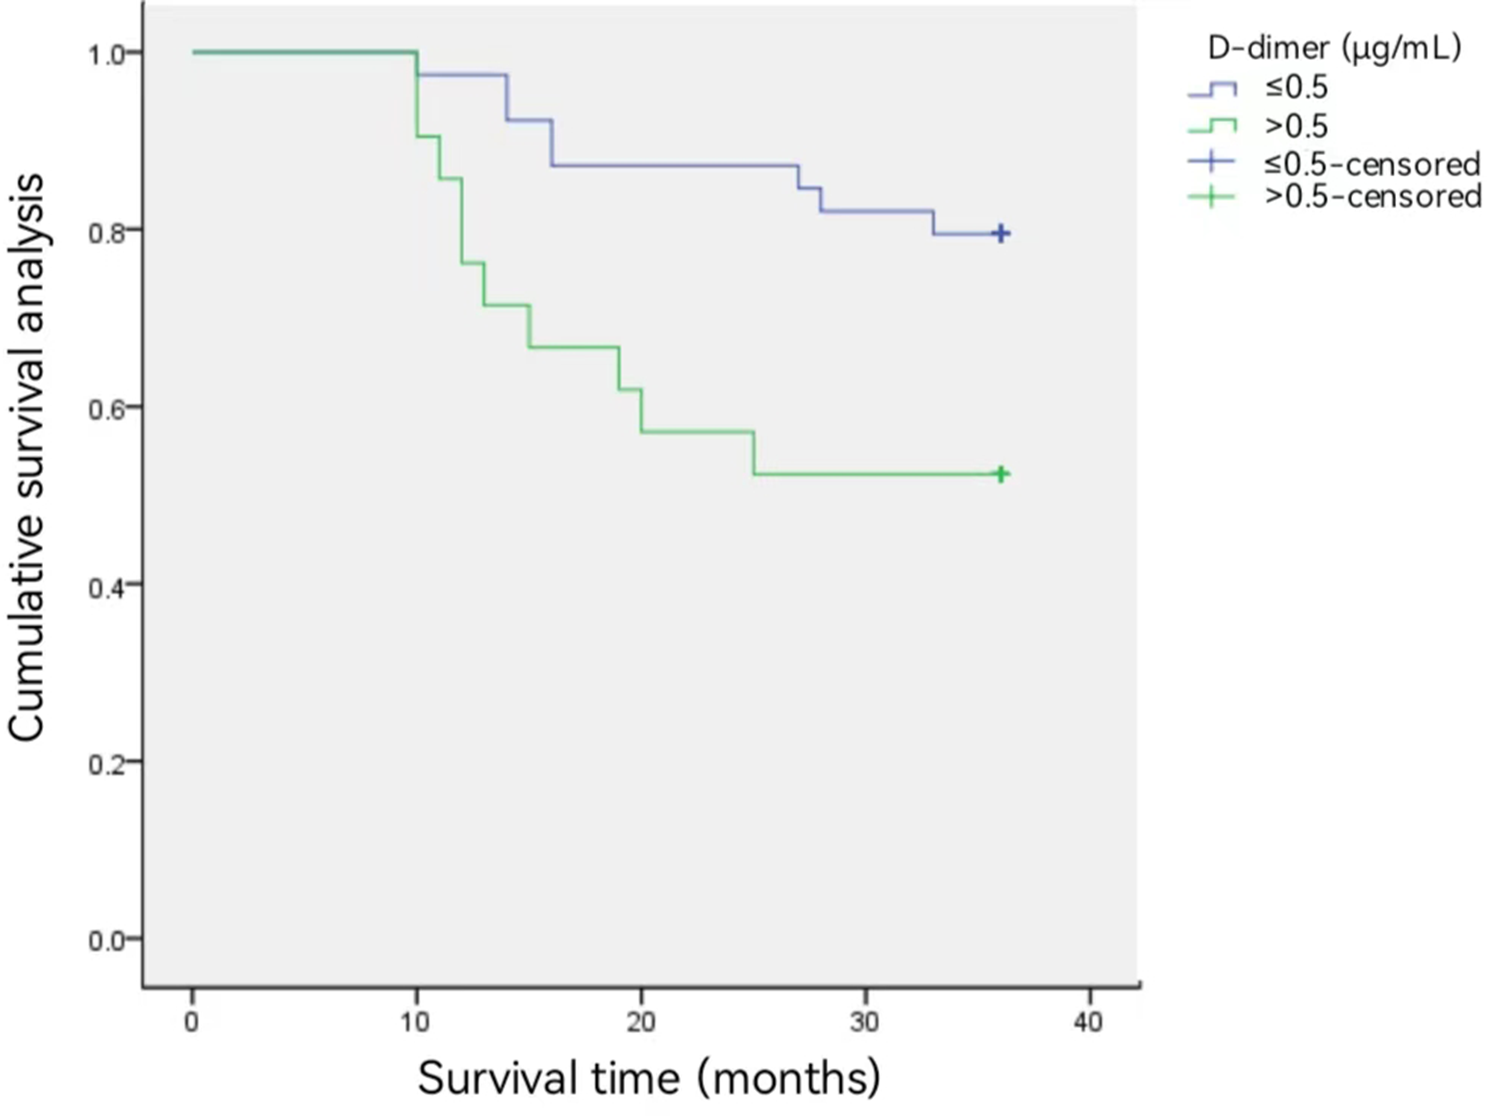 Clinical value of measuring plasma D-dimer levels in patients with esophageal cancer